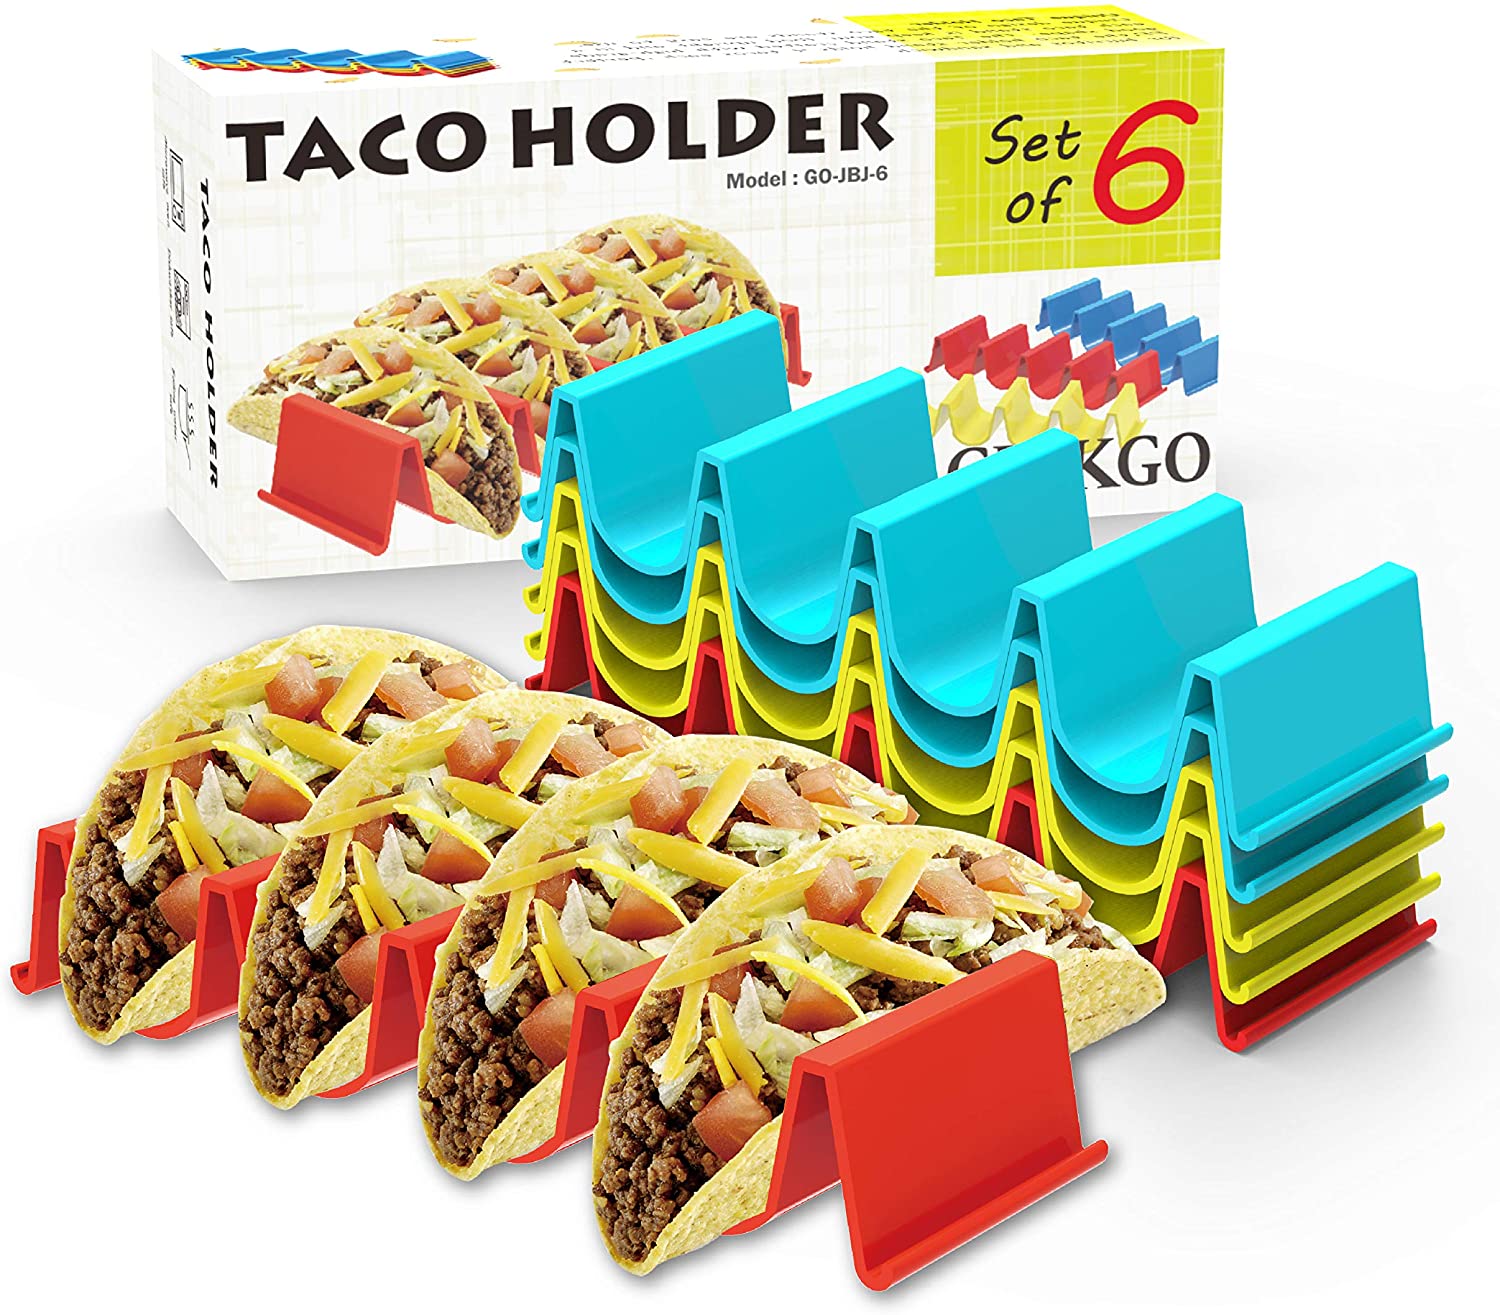 GINKGO 4-Slot Microwave Safe ABS Plastic Taco Holders, 6-Pack